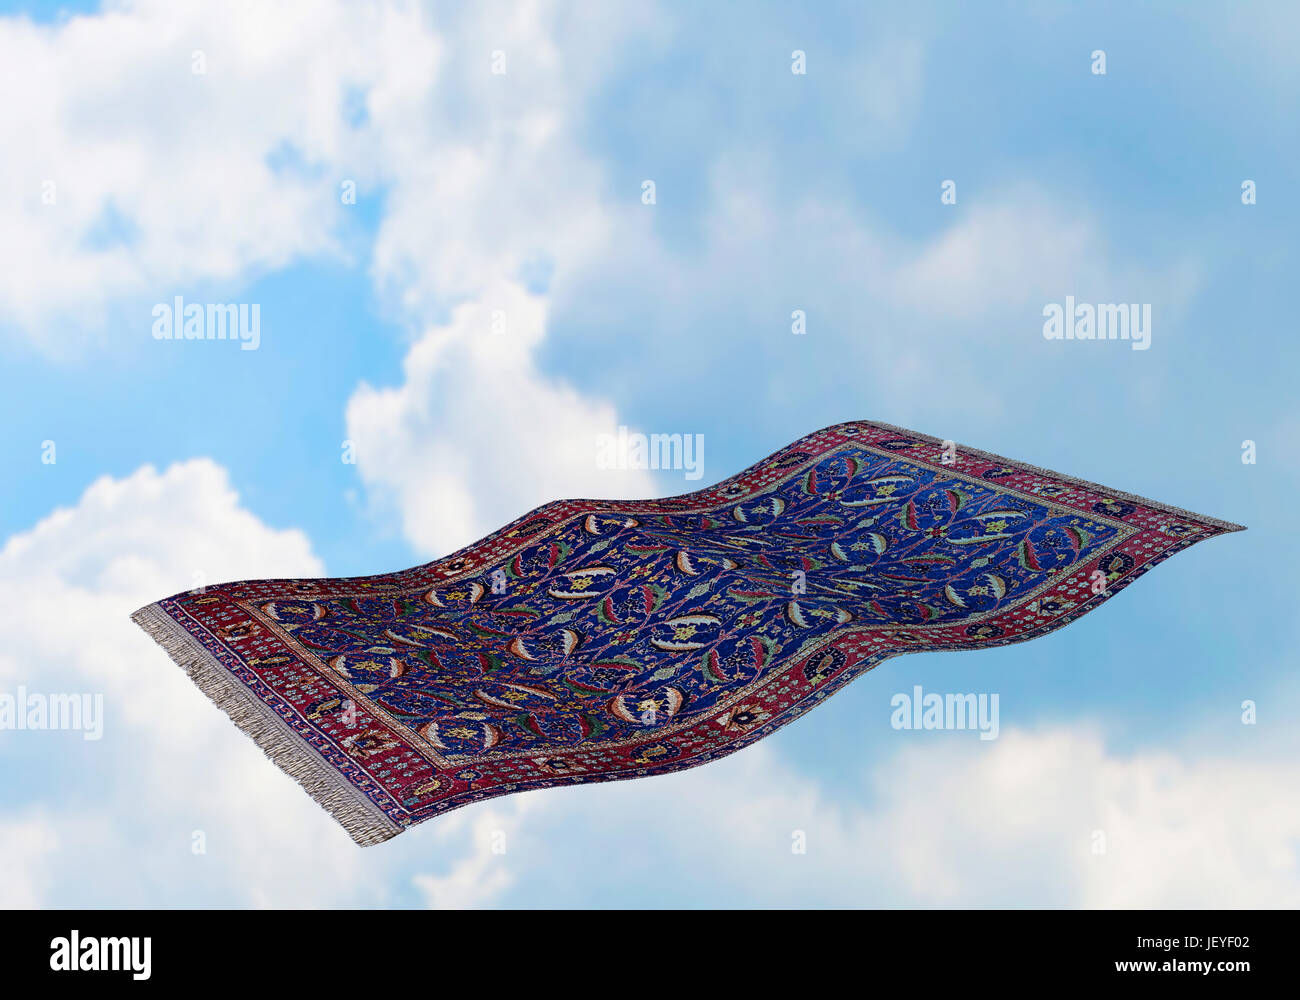 Surrealistic flying carpet against blue sky and white clouds. 3D rendering Stock Photo